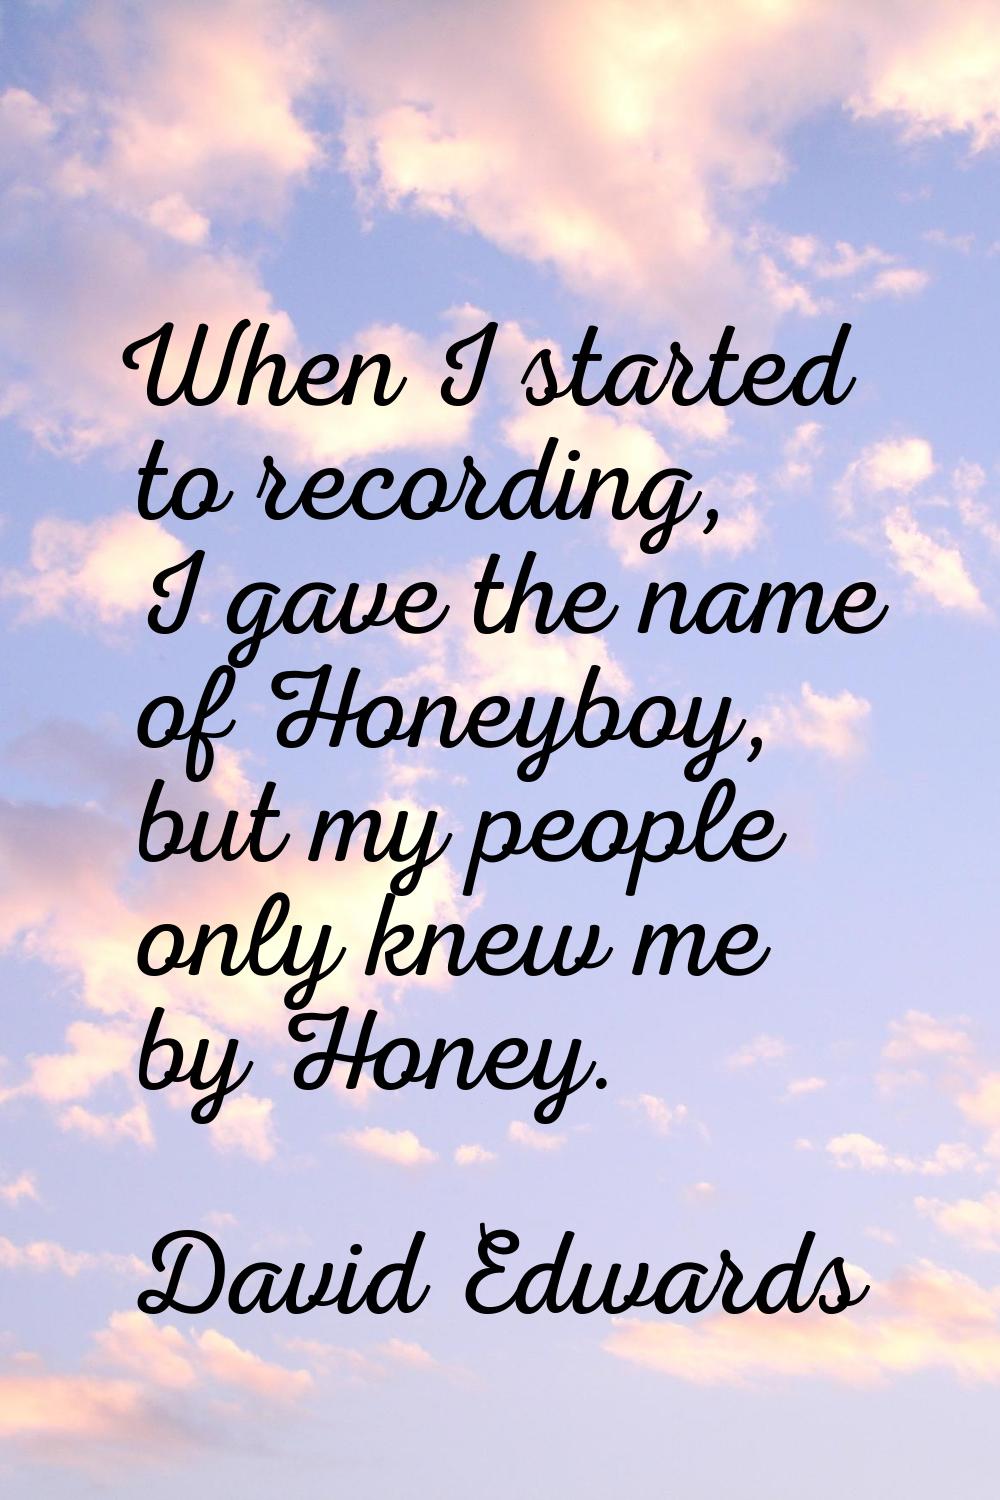 When I started to recording, I gave the name of Honeyboy, but my people only knew me by Honey.